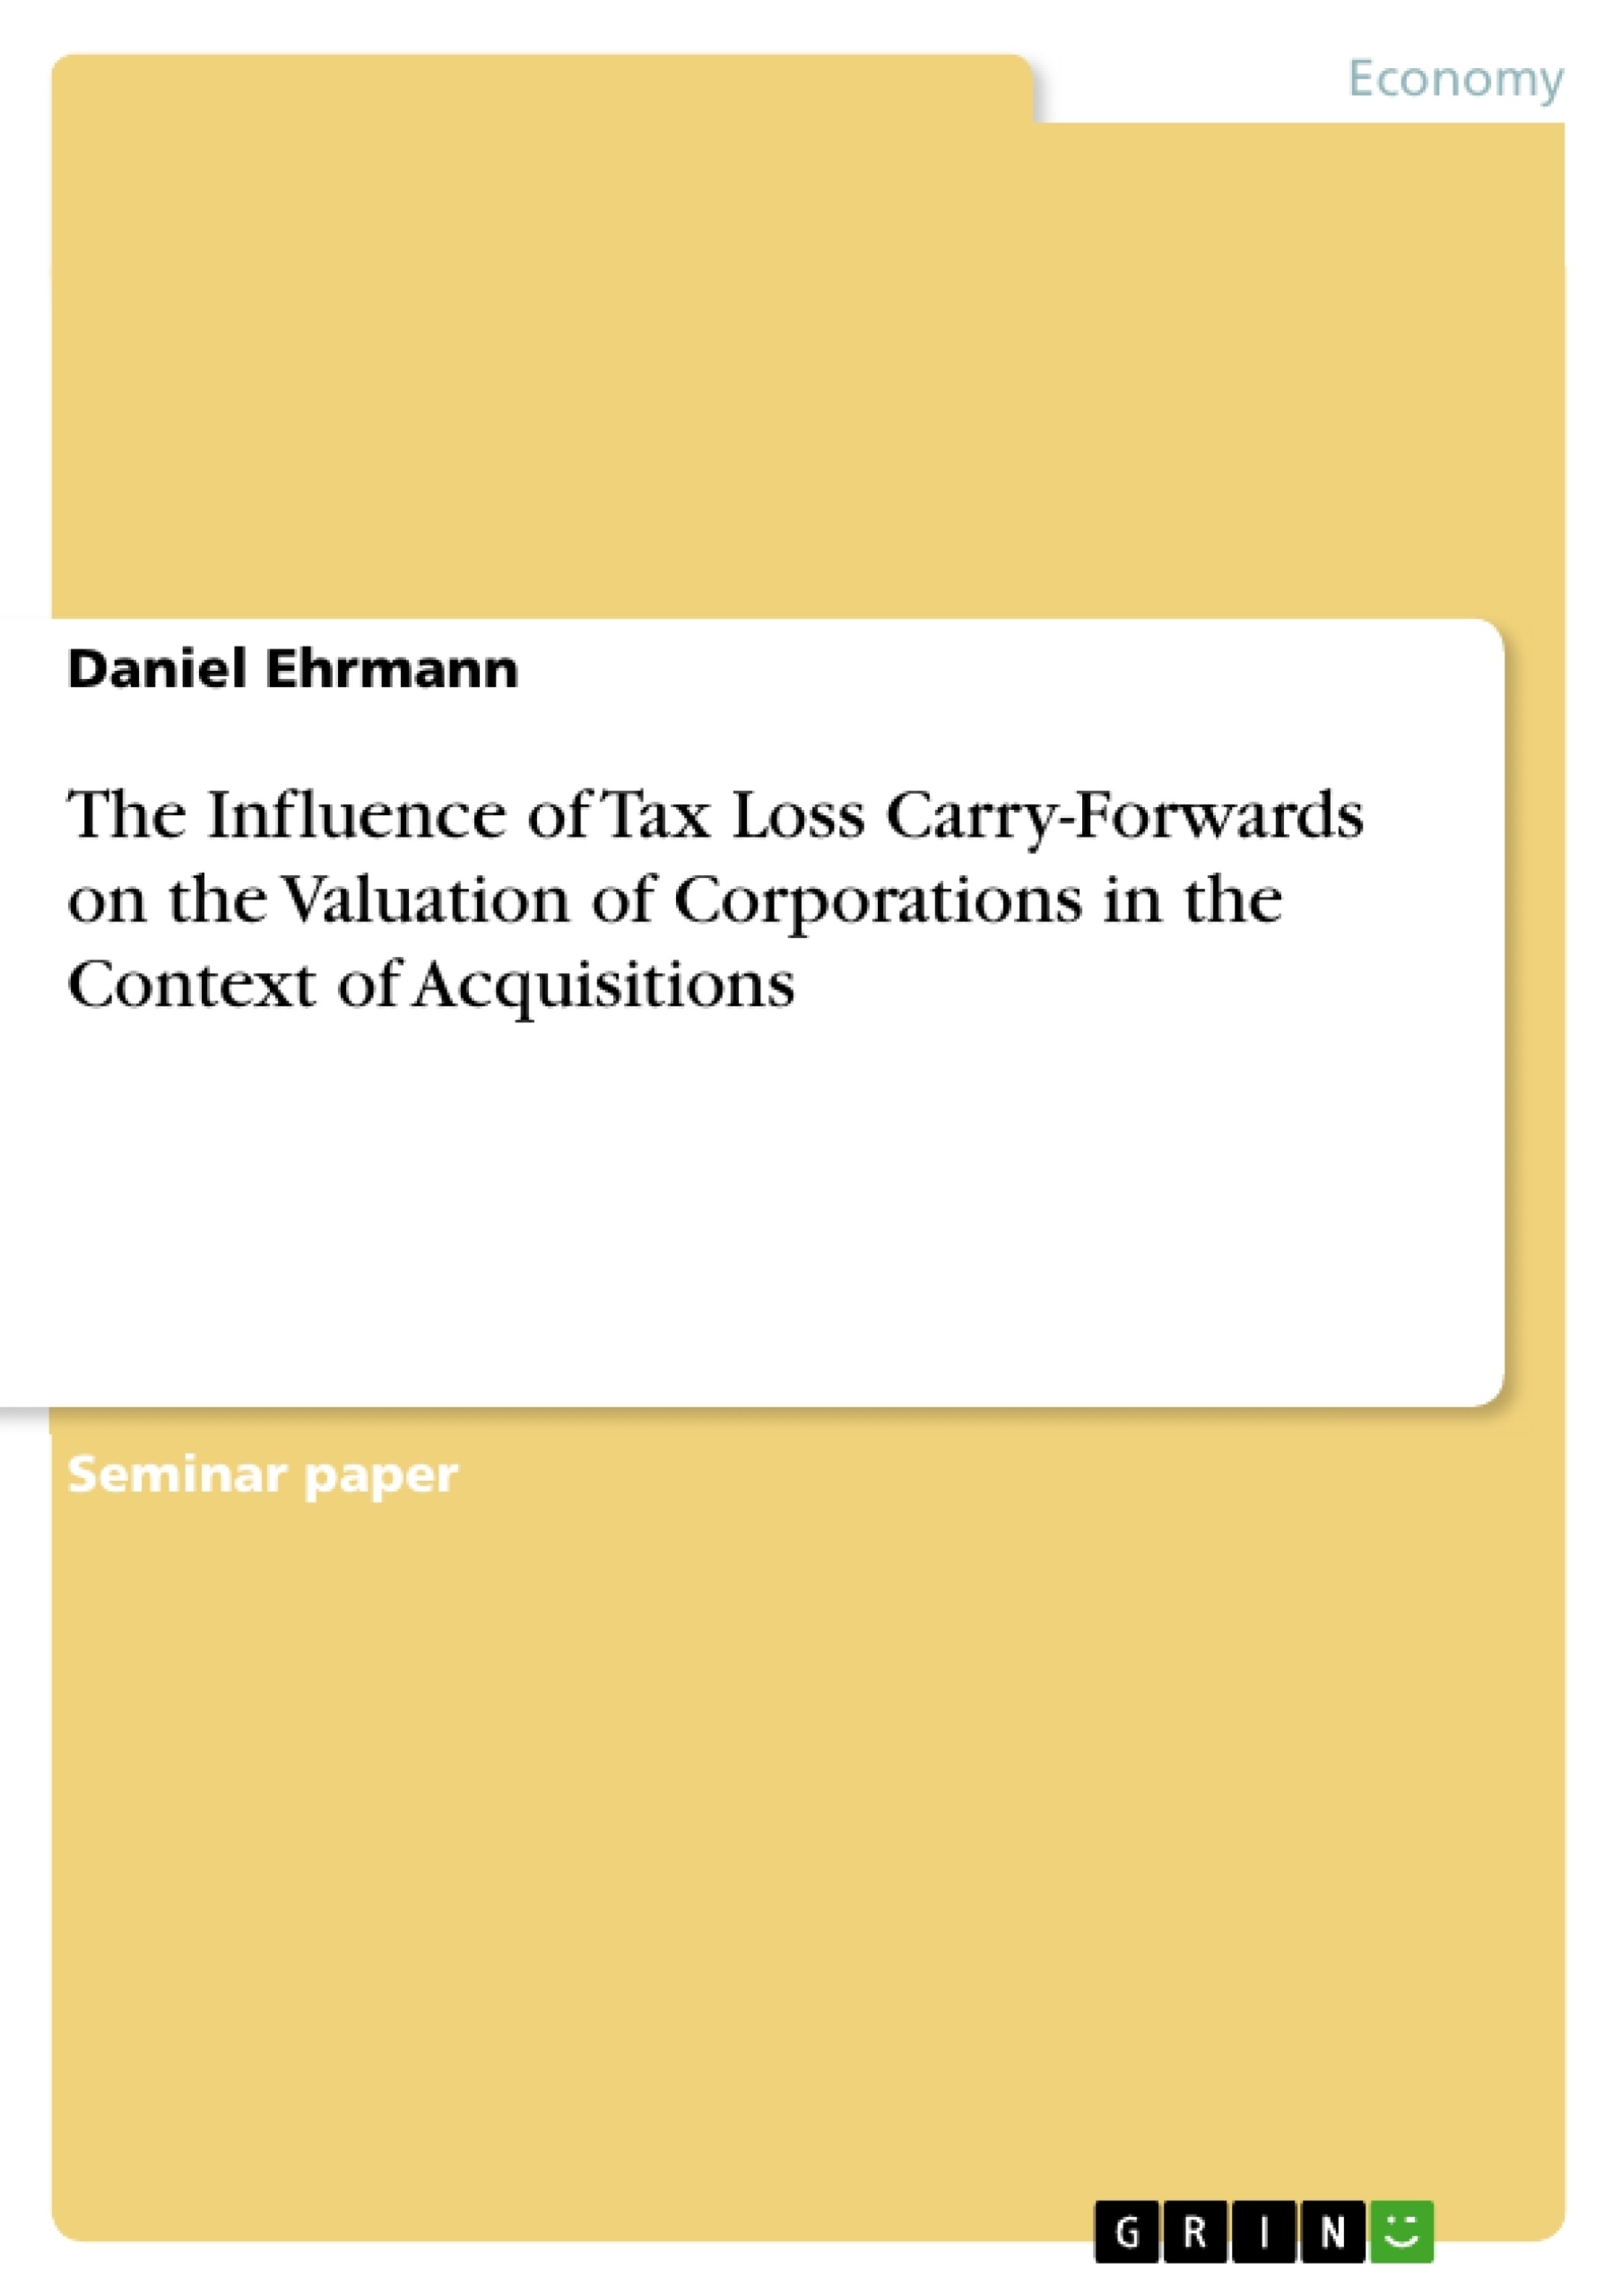 Title: The Influence of Tax Loss Carry-Forwards on the Valuation of Corporations in the Context of Acquisitions